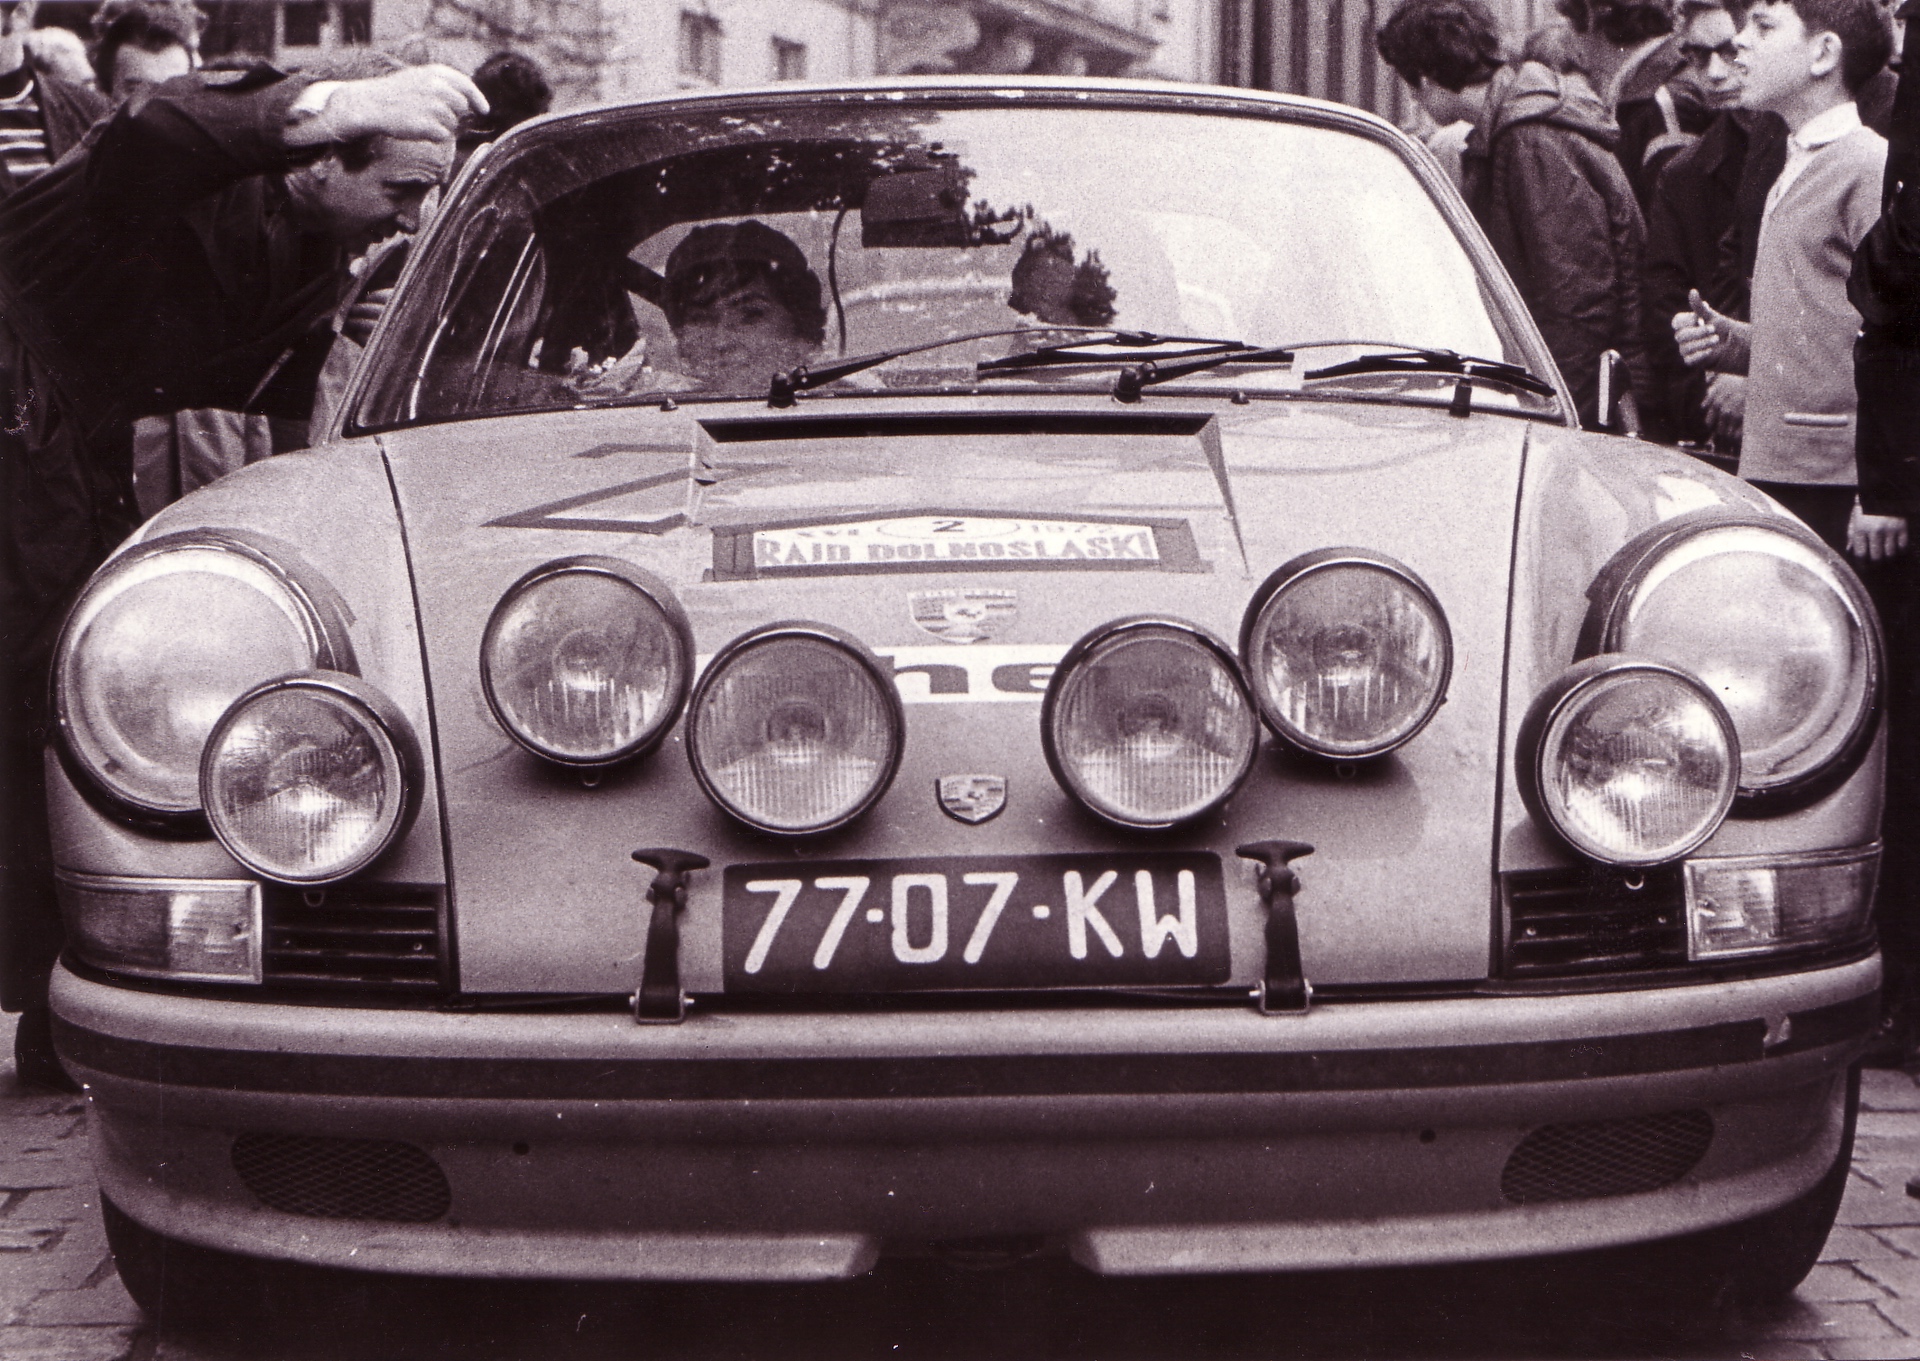 Frontal aspect of Porsche 911 230 0769 before rally in 1972